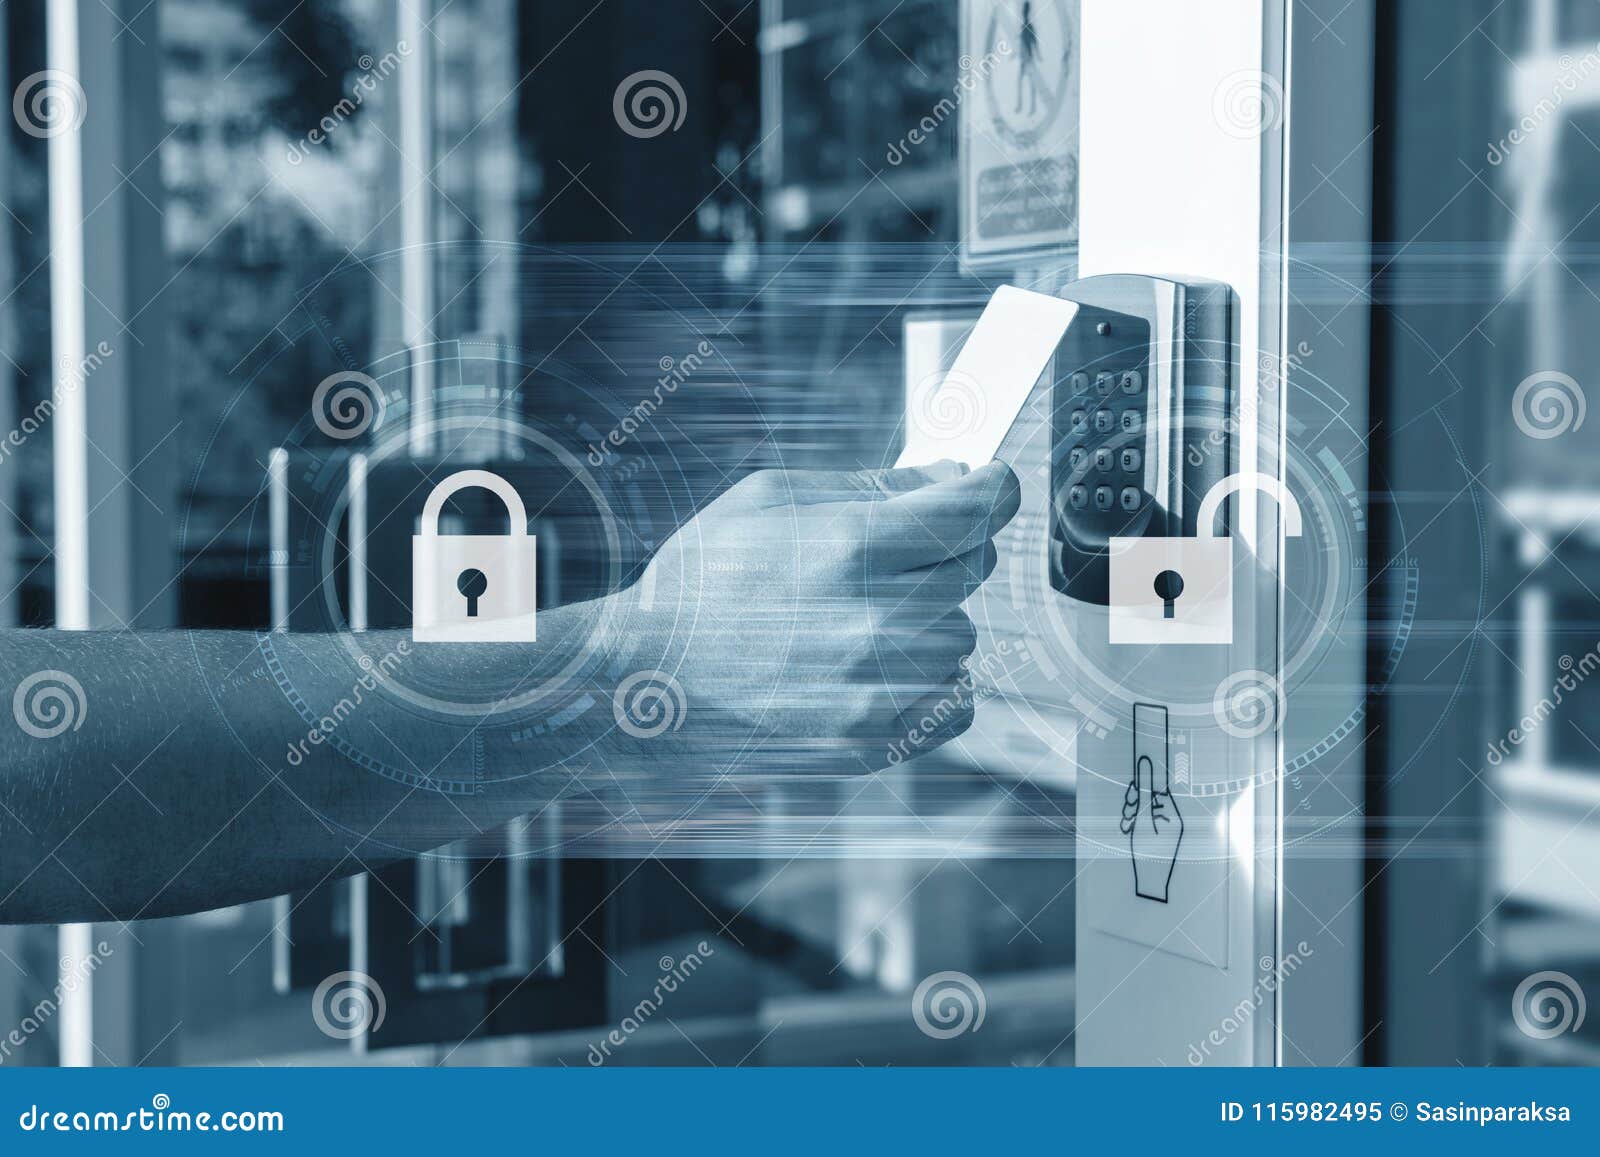 Hand Using Security Key Card Unlocking The Door To Entering Private